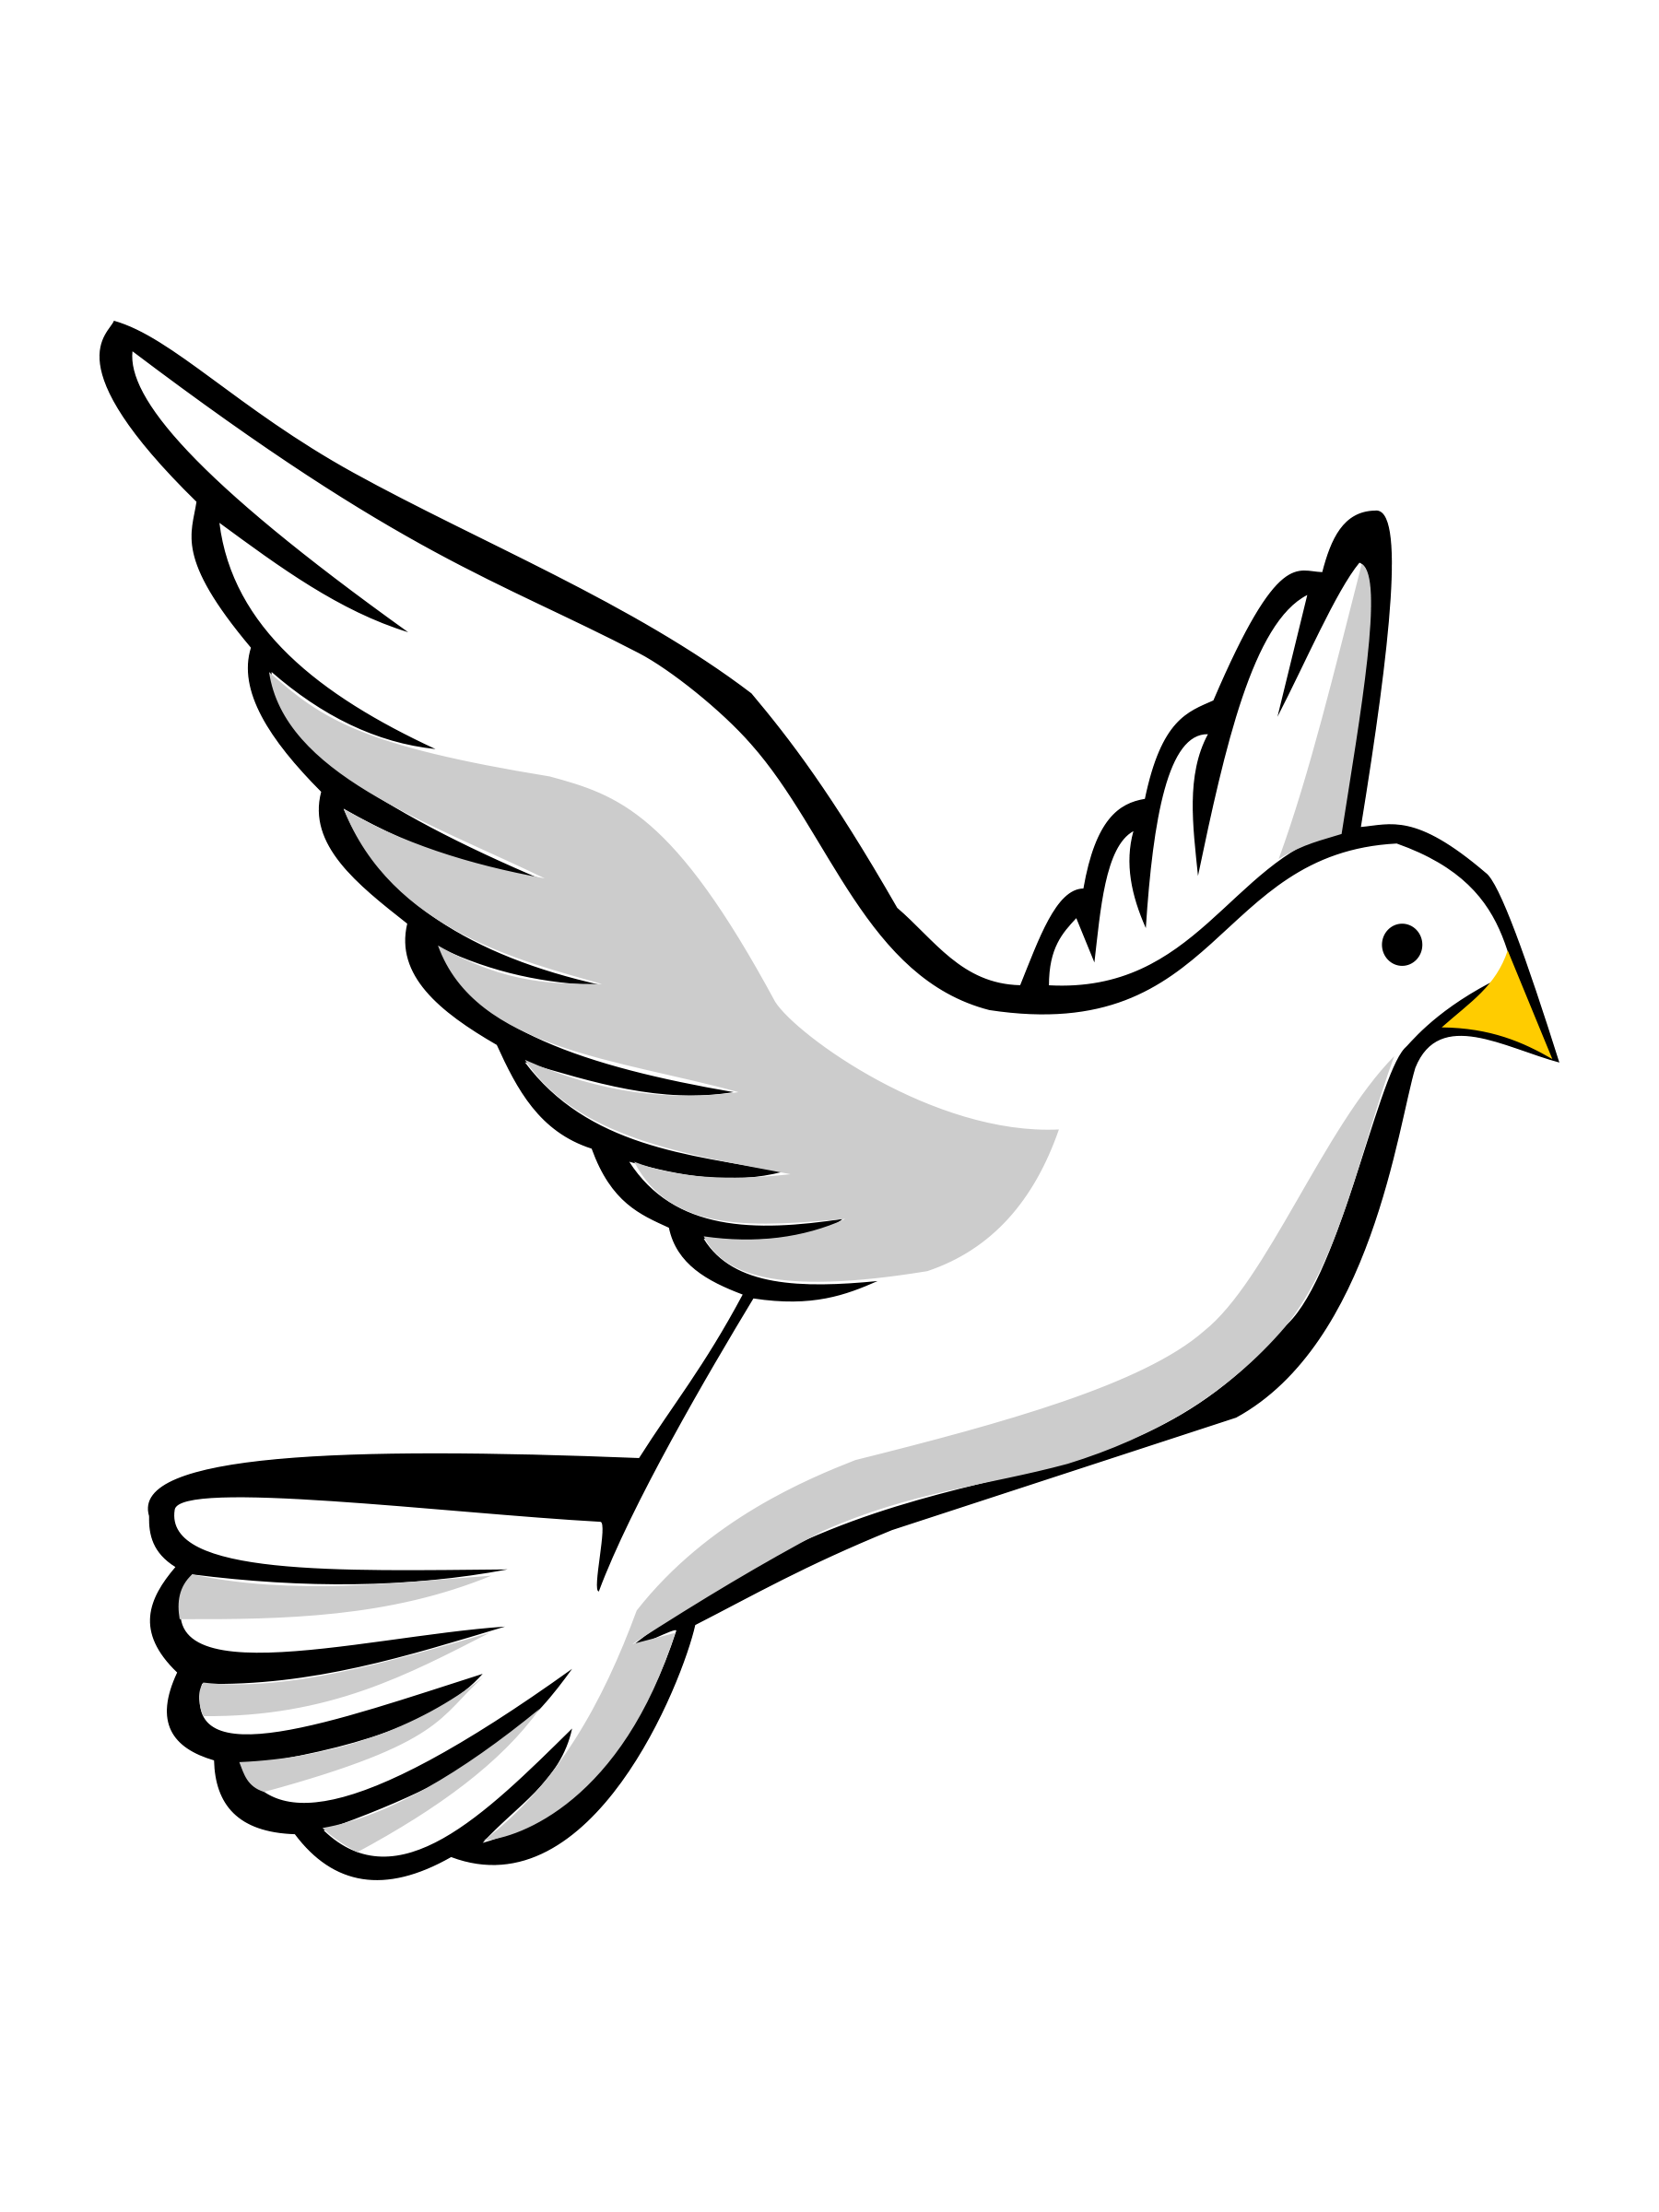 Holy Spirit Dove Clipart White Dove Clipart Flying Dove Png ...